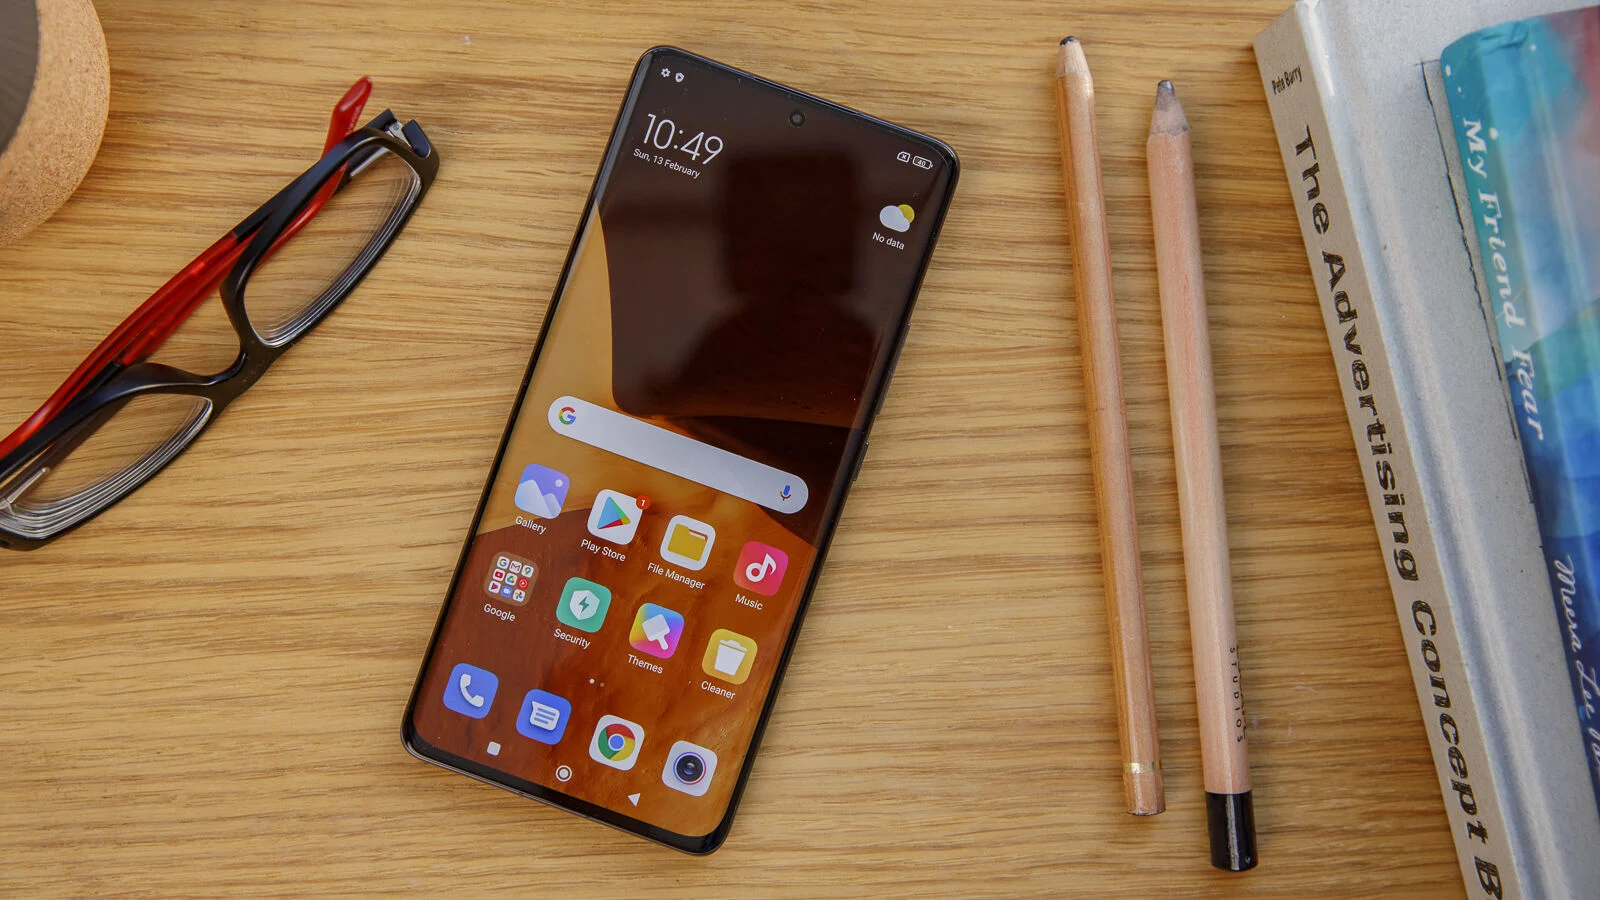 But the dollar at 58 rubles: the Russian Xiaomi 12 Pro has become the most expensive smartphone in the history of the company